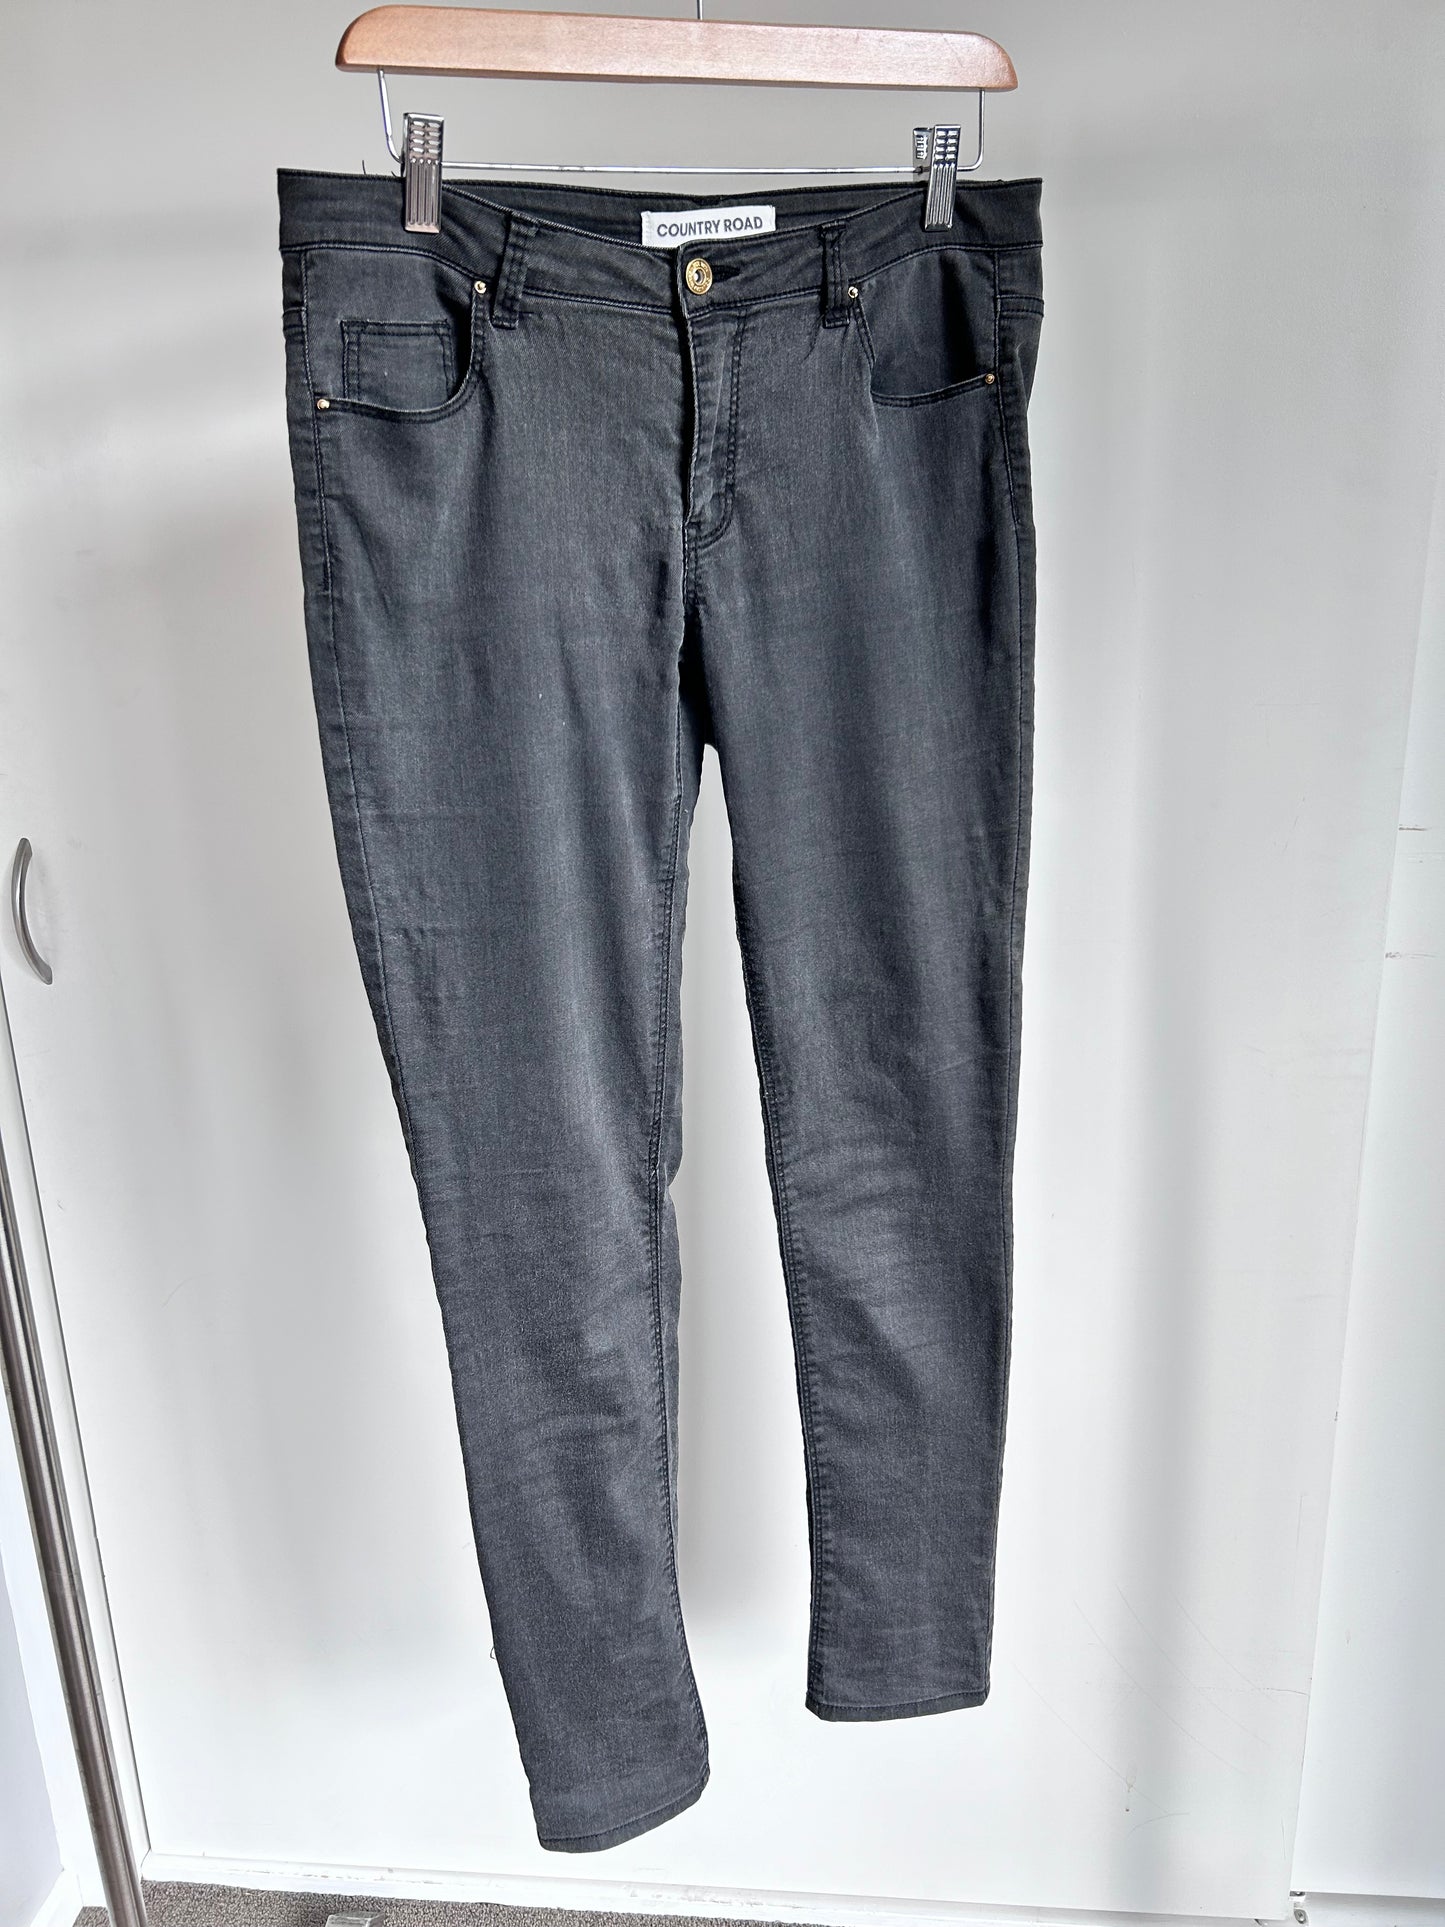 Country Road black jeans - size 10